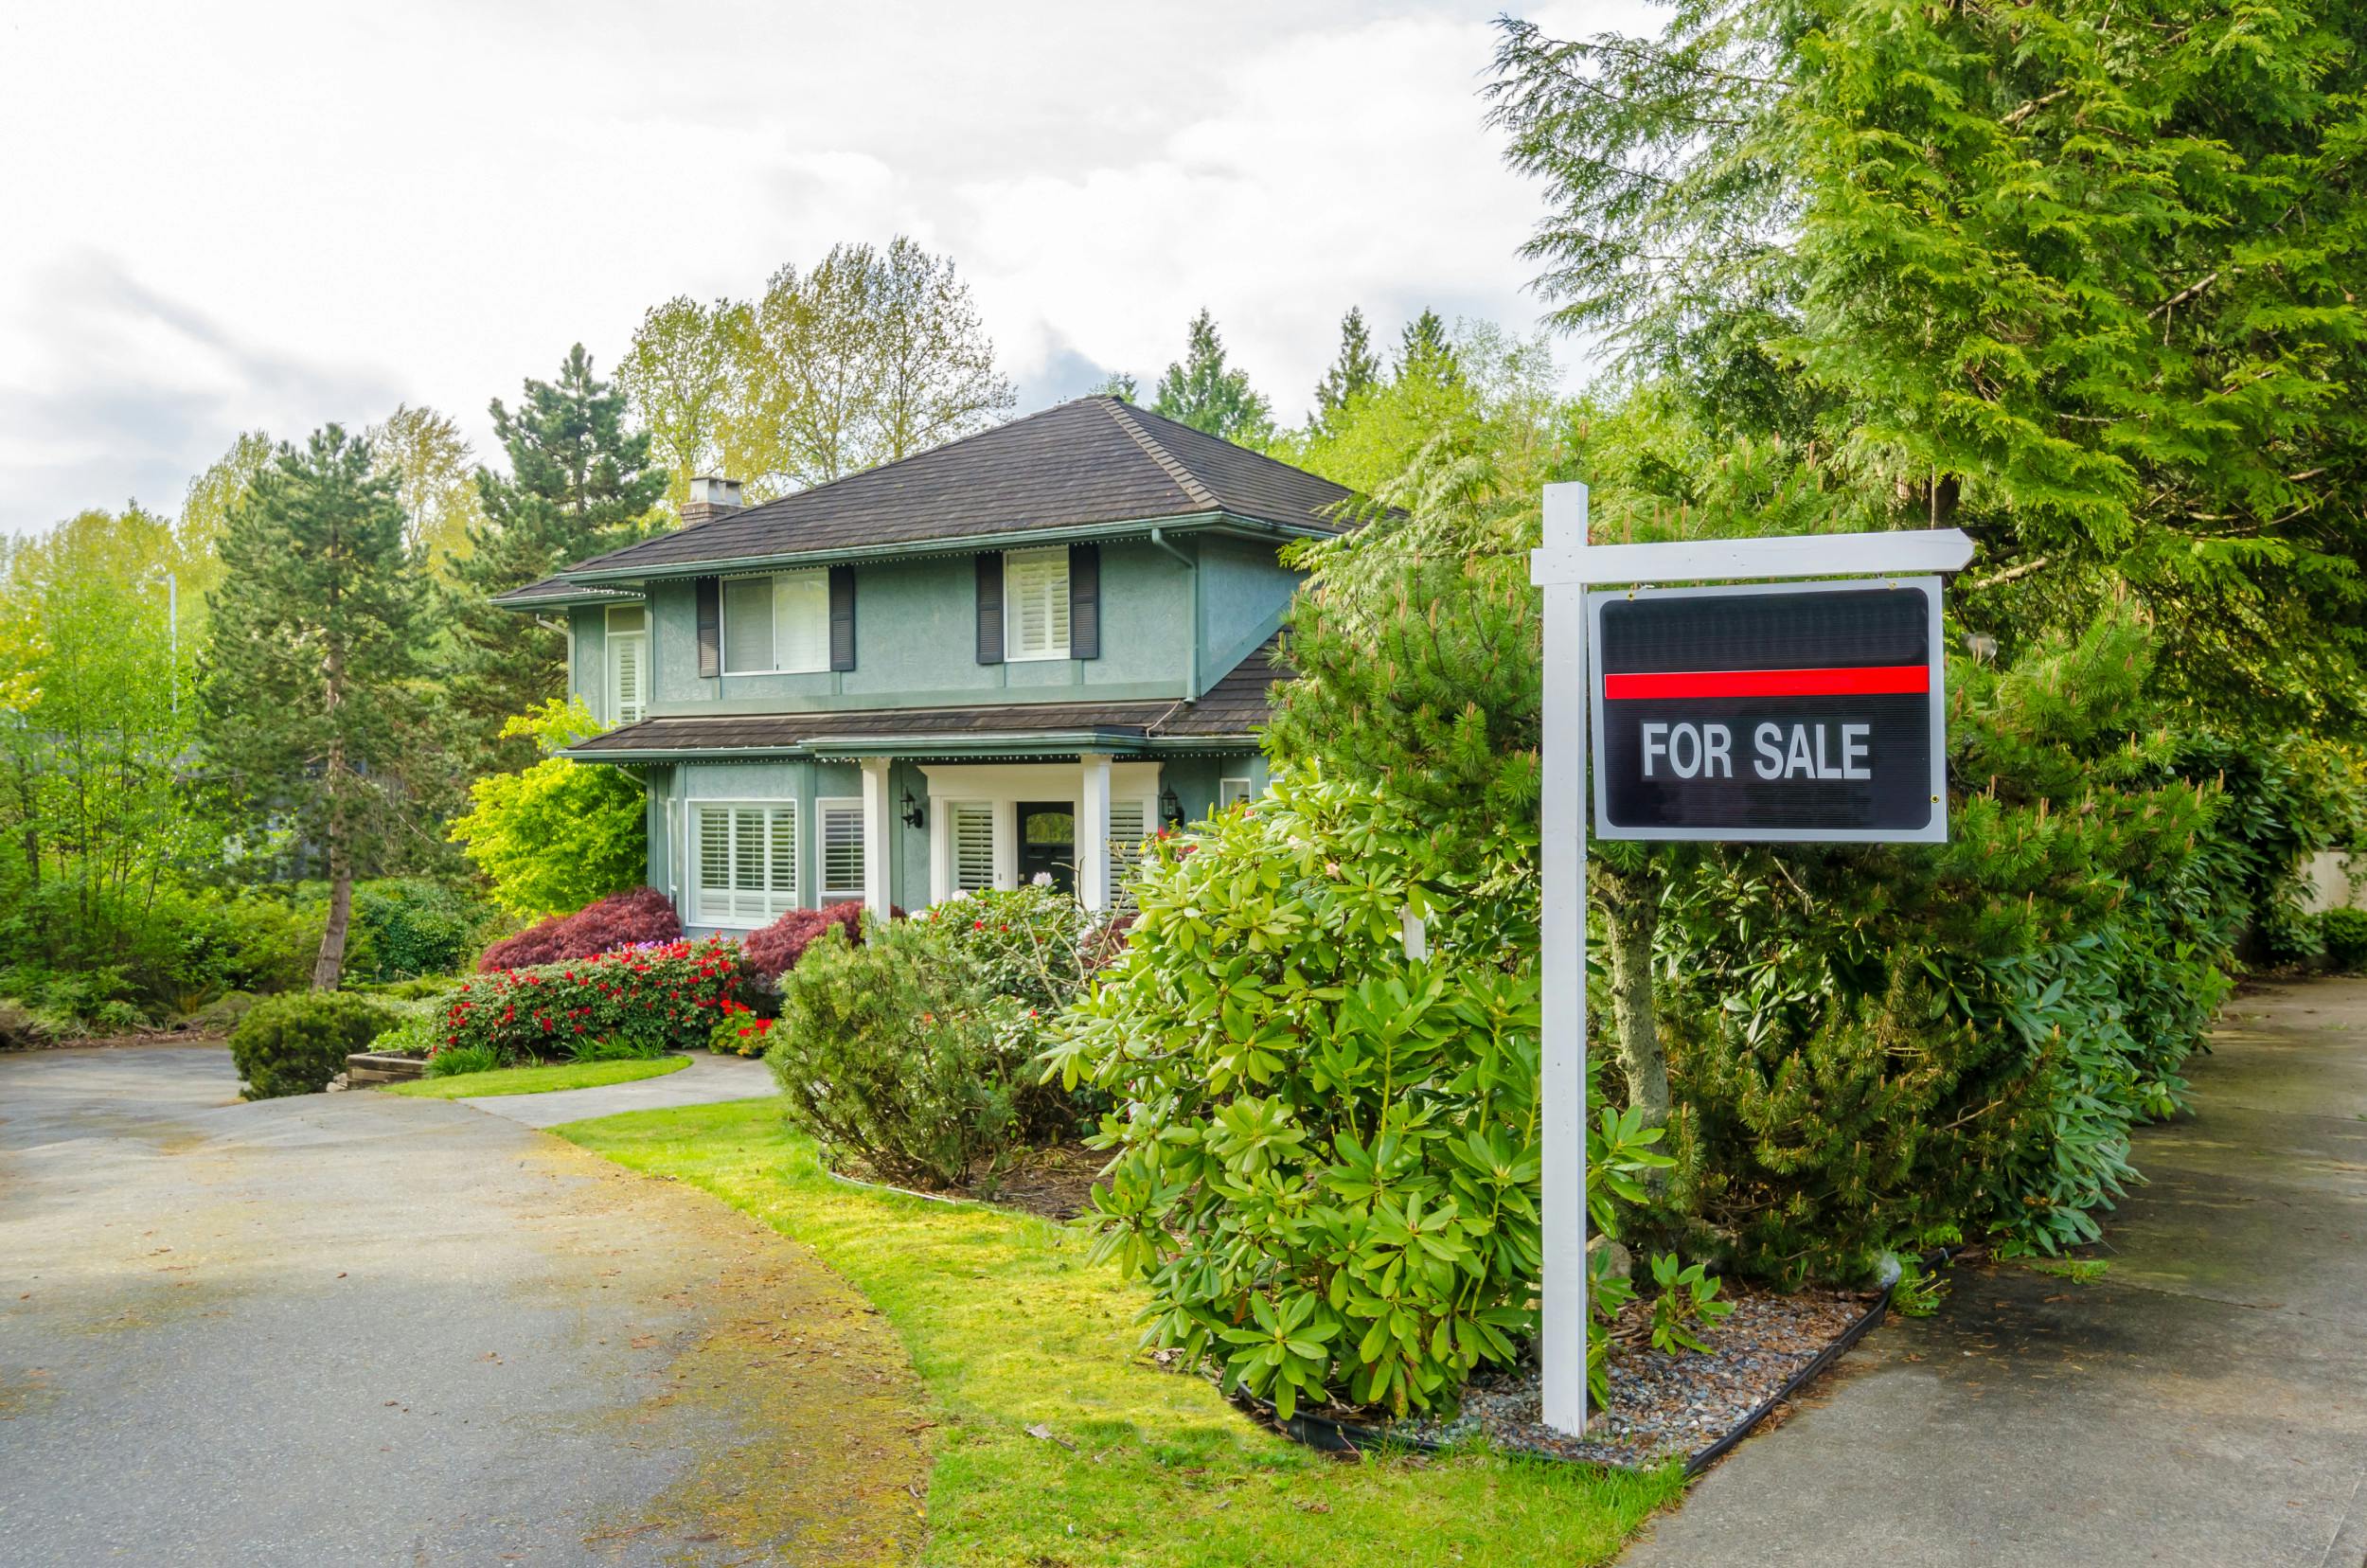 There’s More Than One Way To Sell Your Home